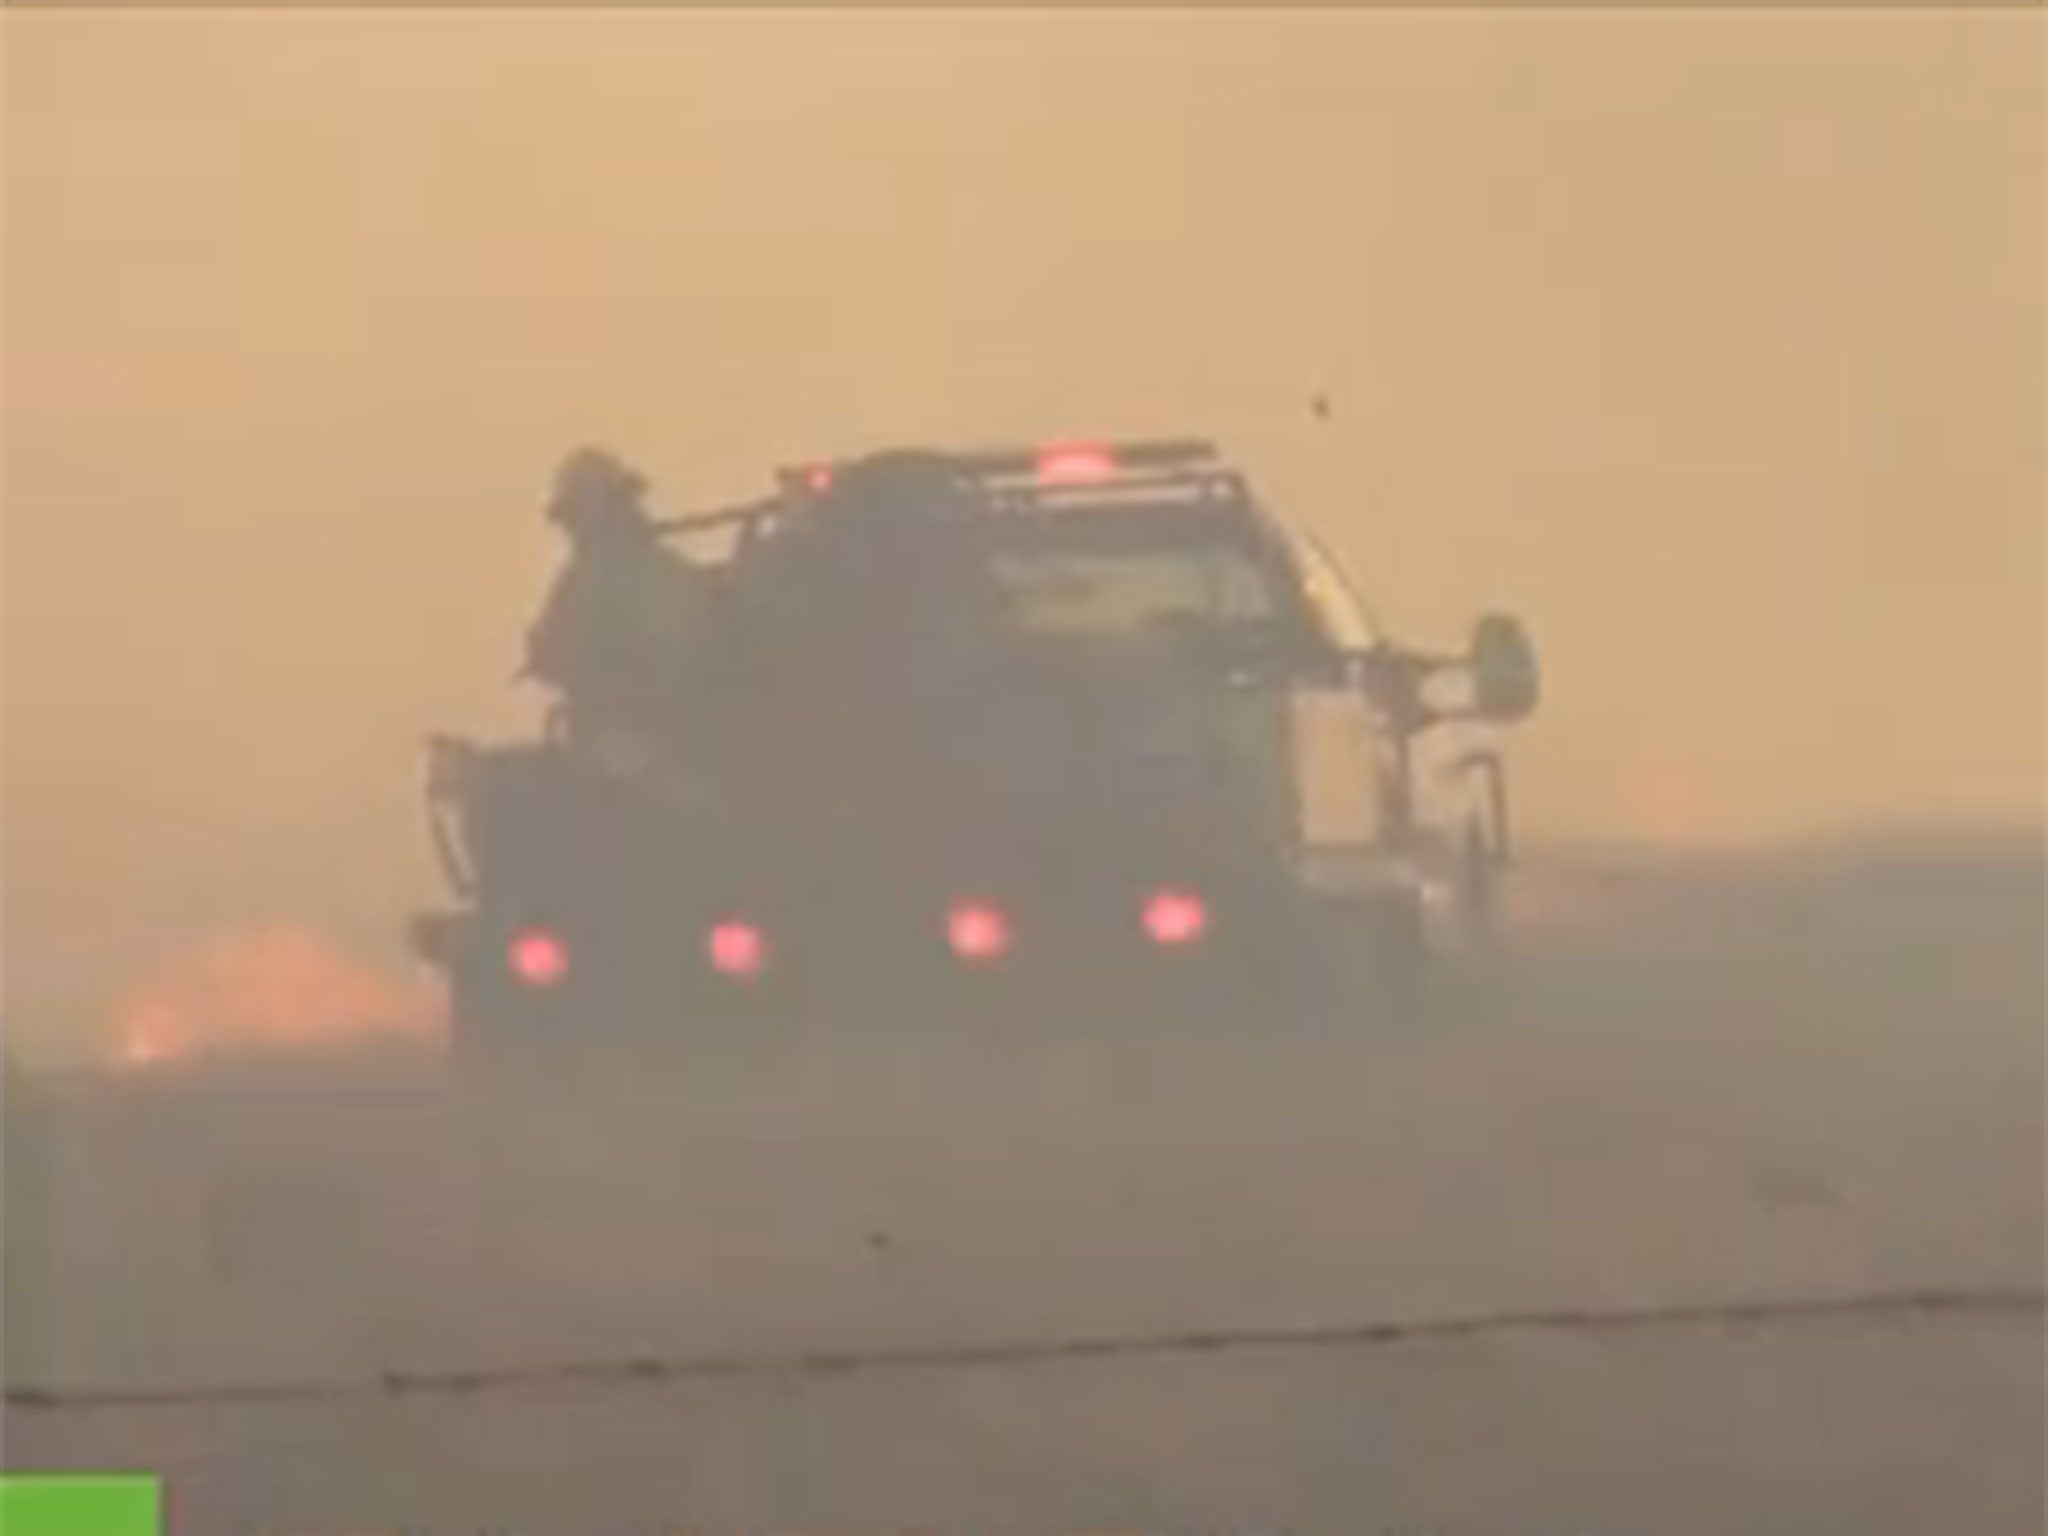 10 fire crews were sent out to fight the fire in Logan County